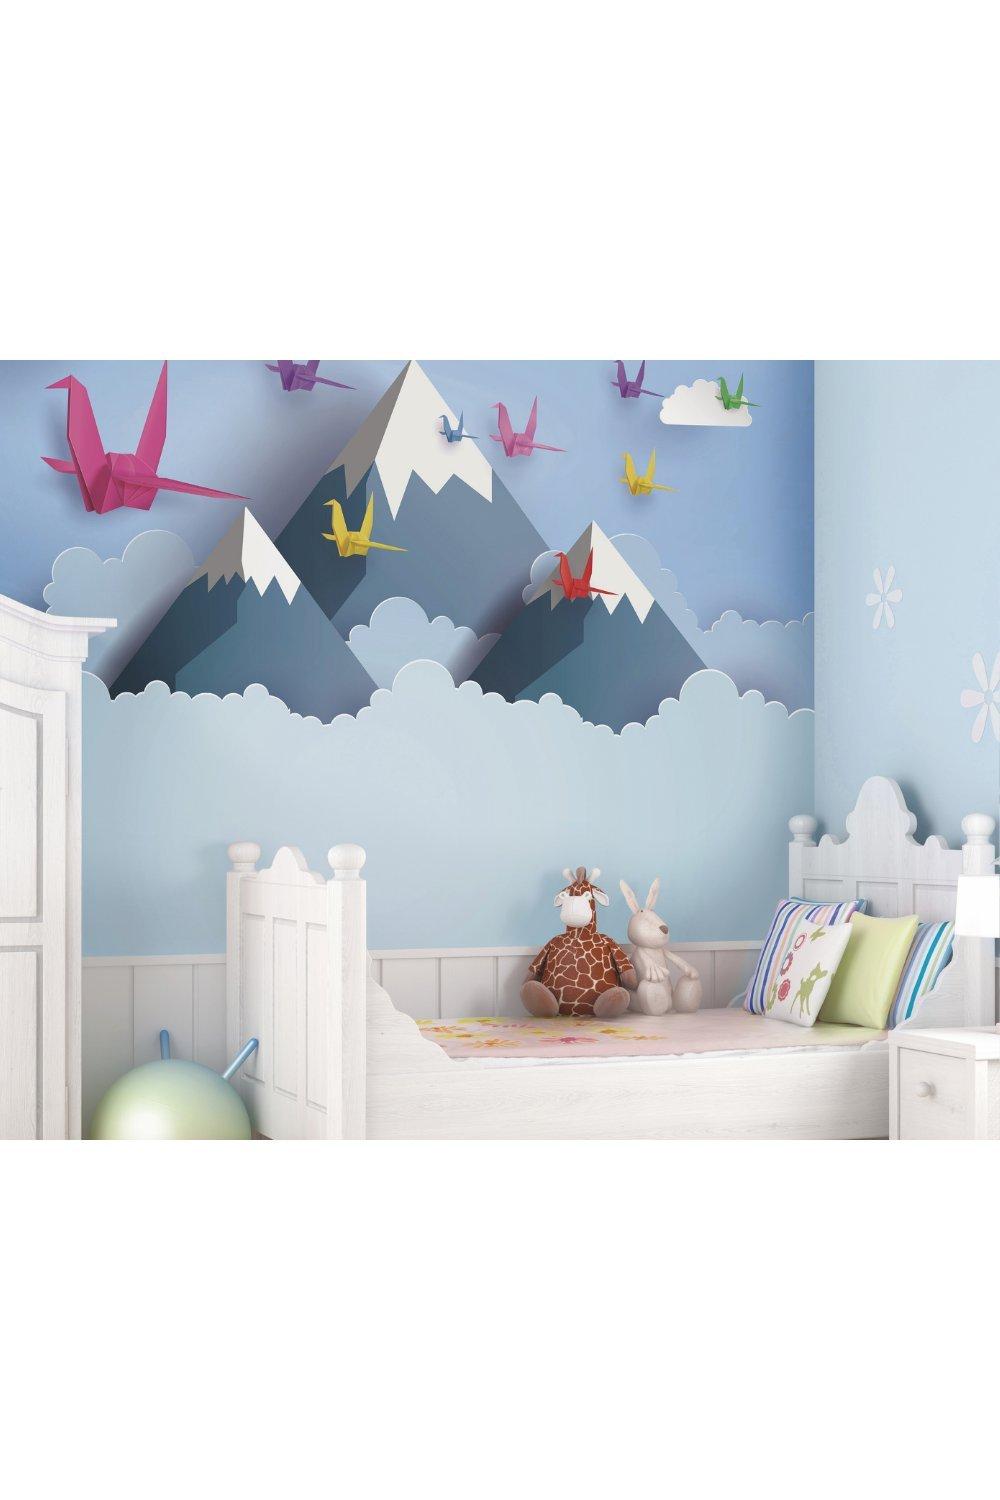 Origami Mountains Wall Mural